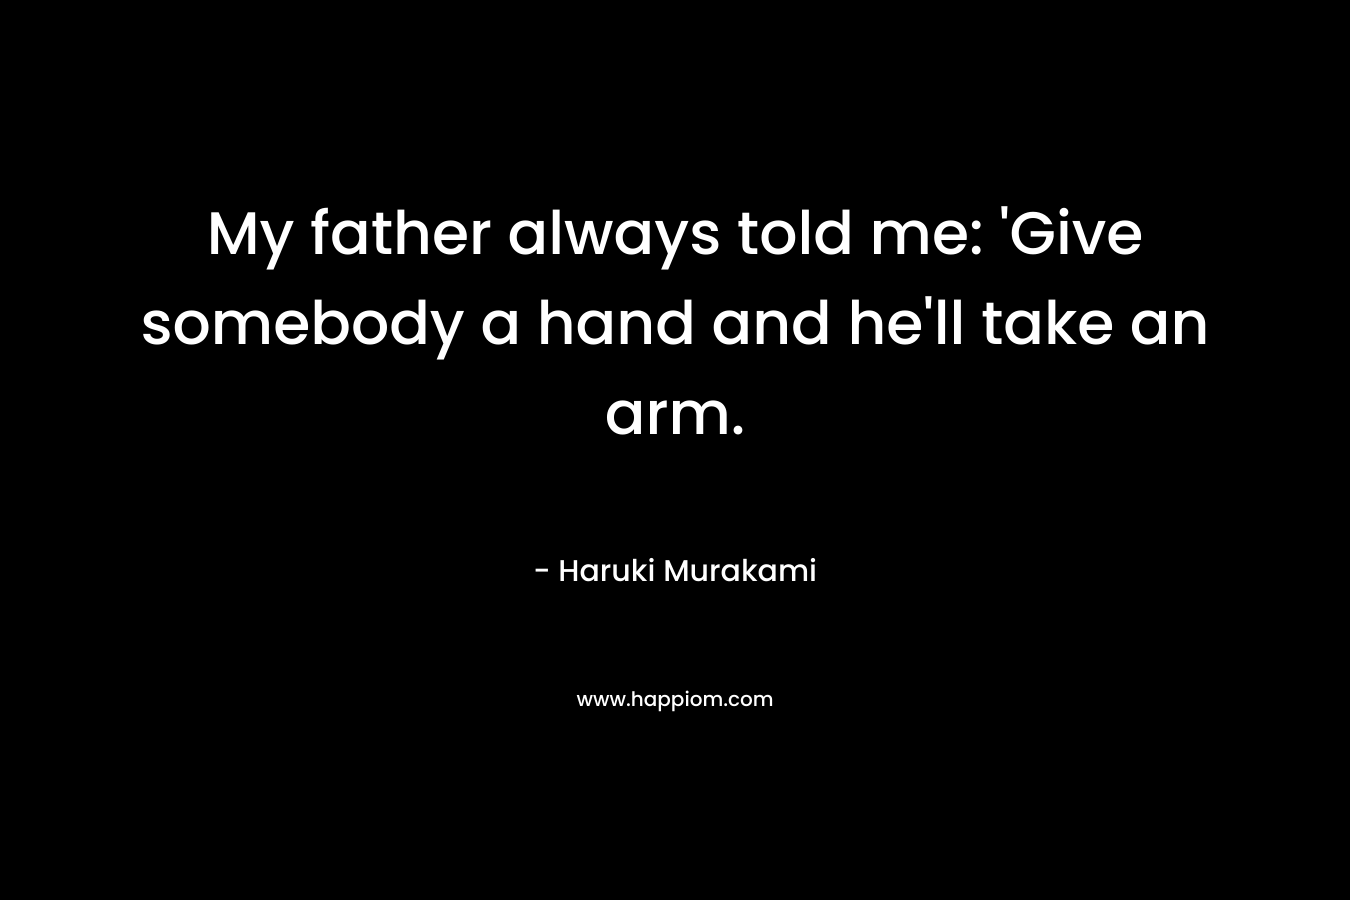 My father always told me: 'Give somebody a hand and he'll take an arm.